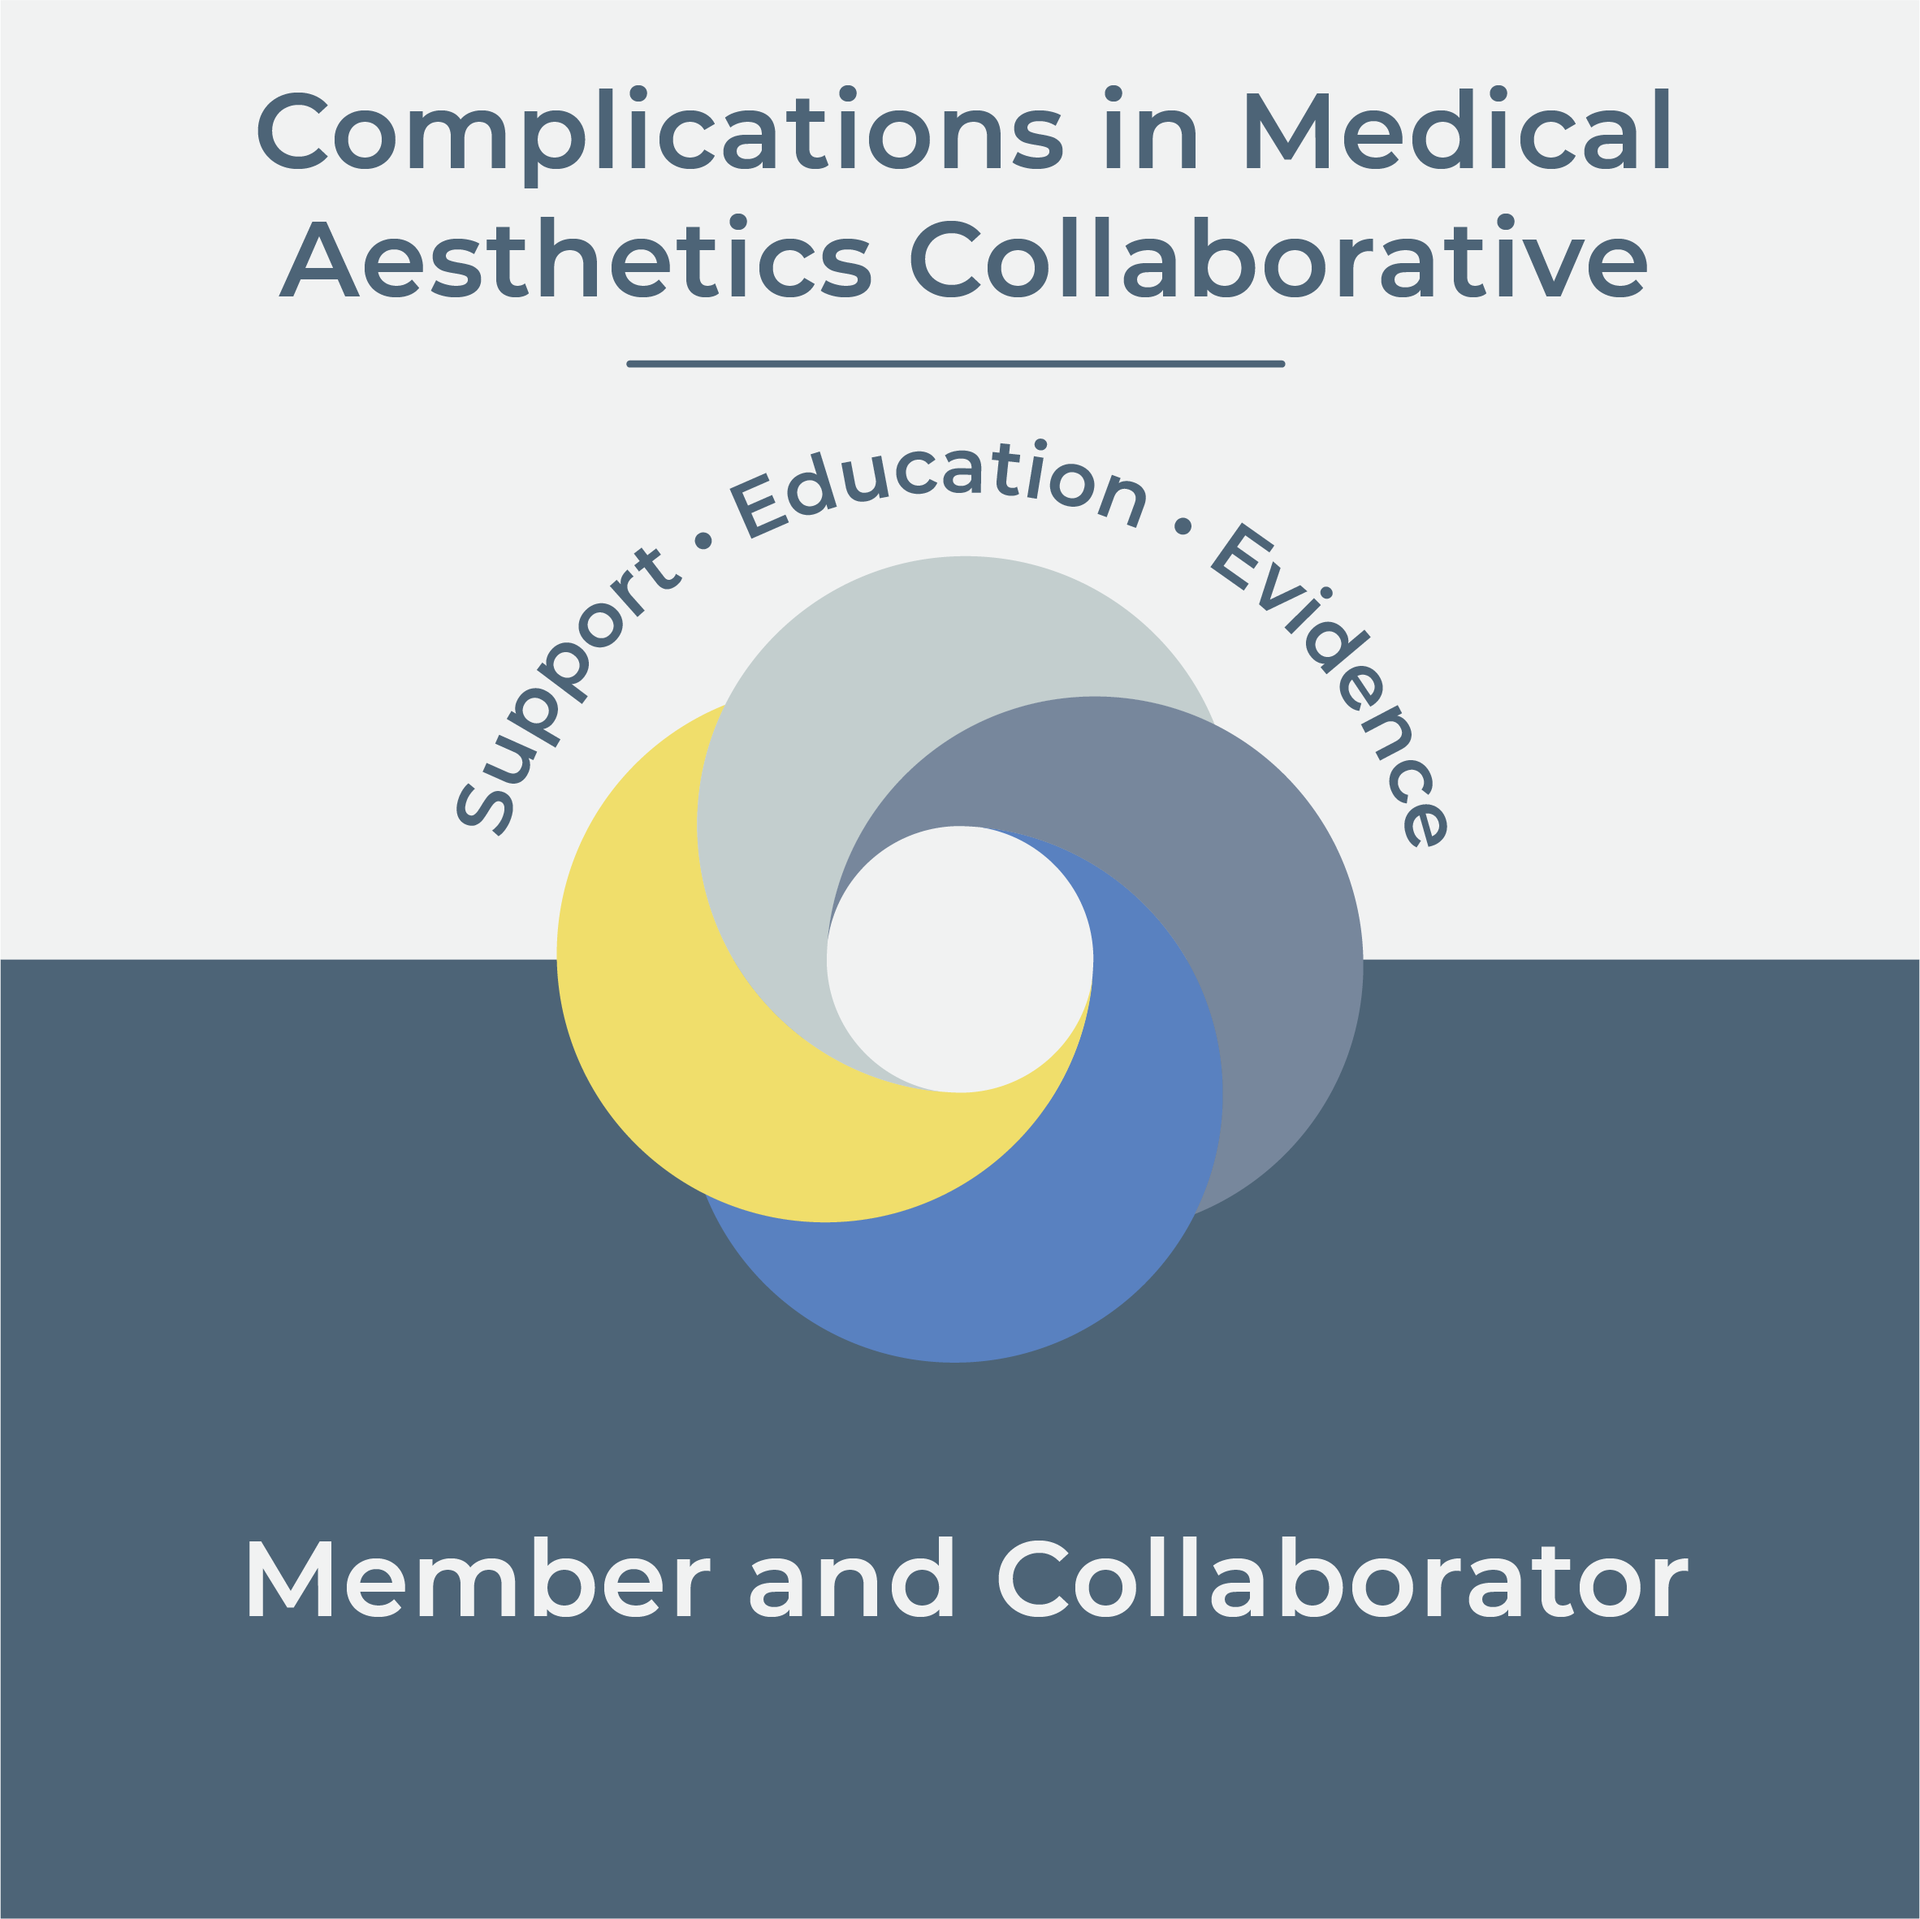 Member and collaborator of complications in medical aesthetics collaborative